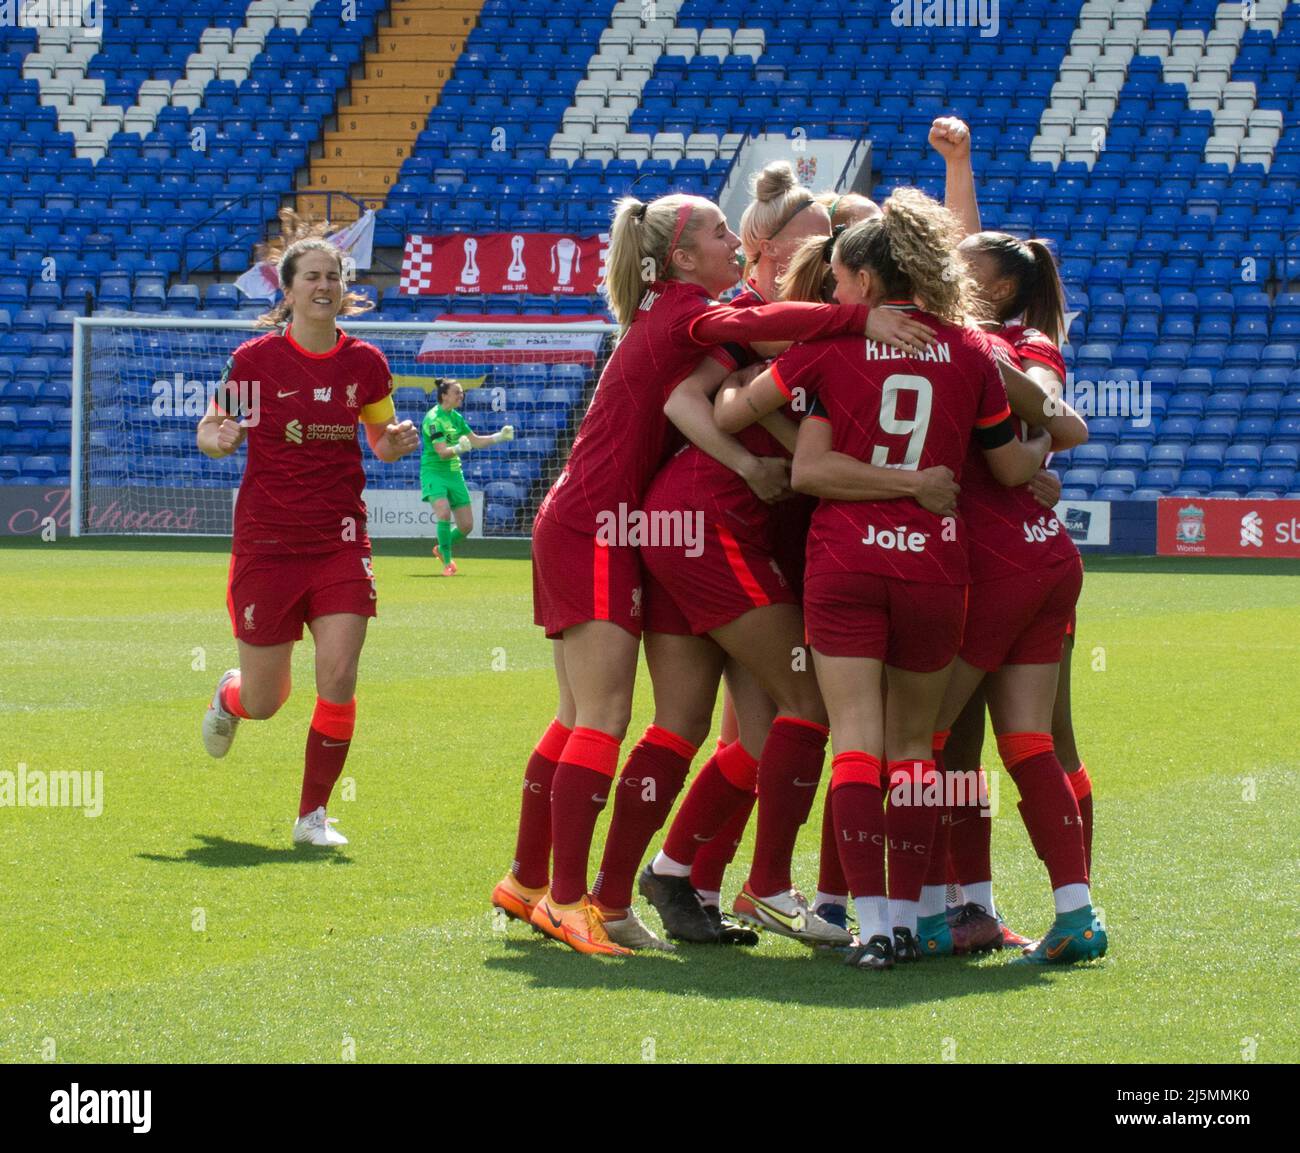 Birkenhead, UK. 24th Apr, 2022. Liverpool players celebrate a goal during the Womens Championship football match between Liverpool and Sheffield United at Prenton Park in Birkenhead, England. Terry Scott/SPP Credit: SPP Sport Press Photo. /Alamy Live News Stock Photo